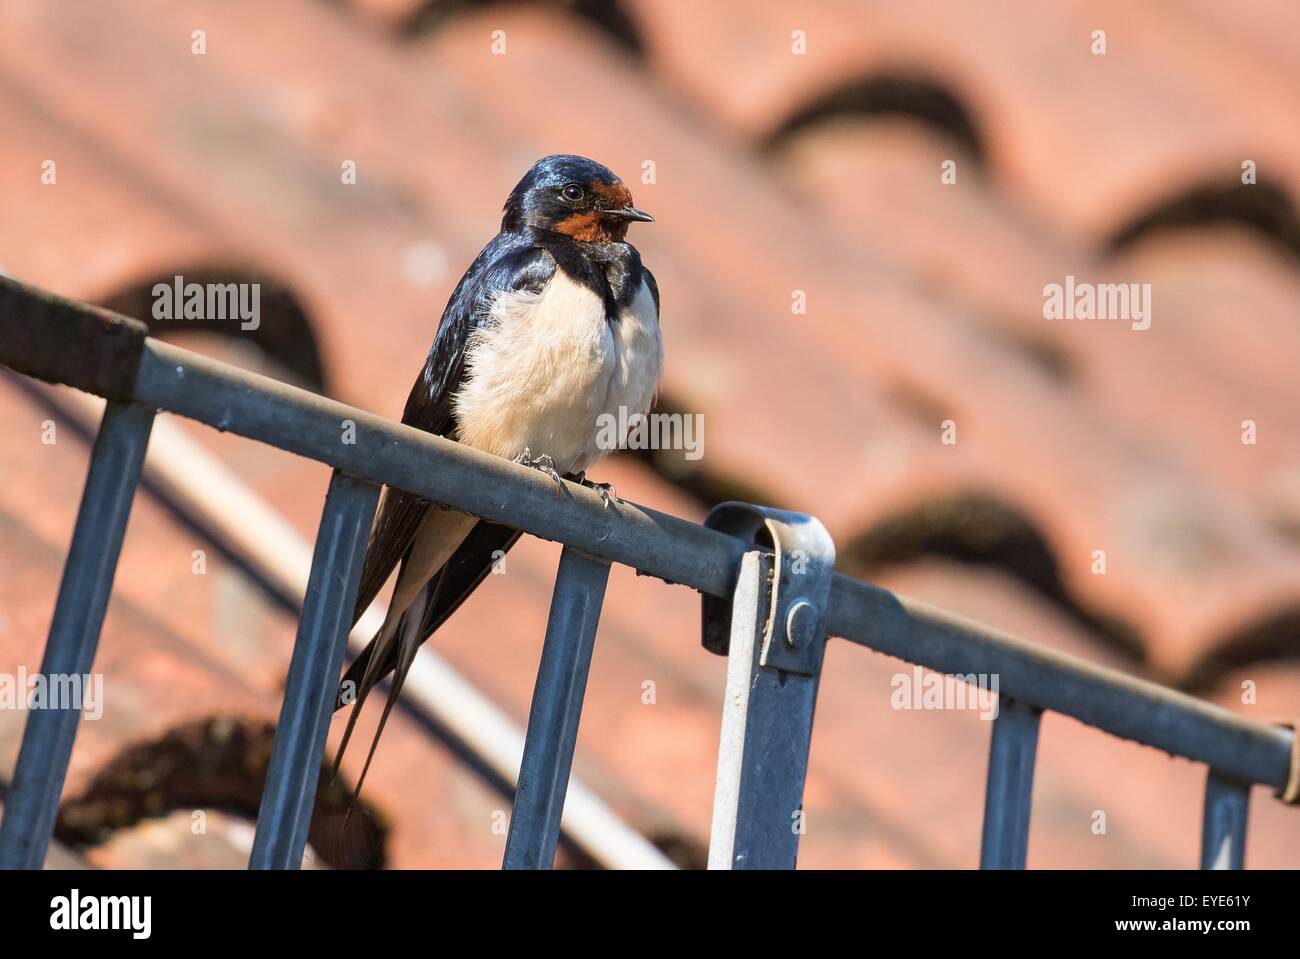 Barn Swallow (Hirundo rustica) perched on gutter, Hesse, Germany Stock Photo